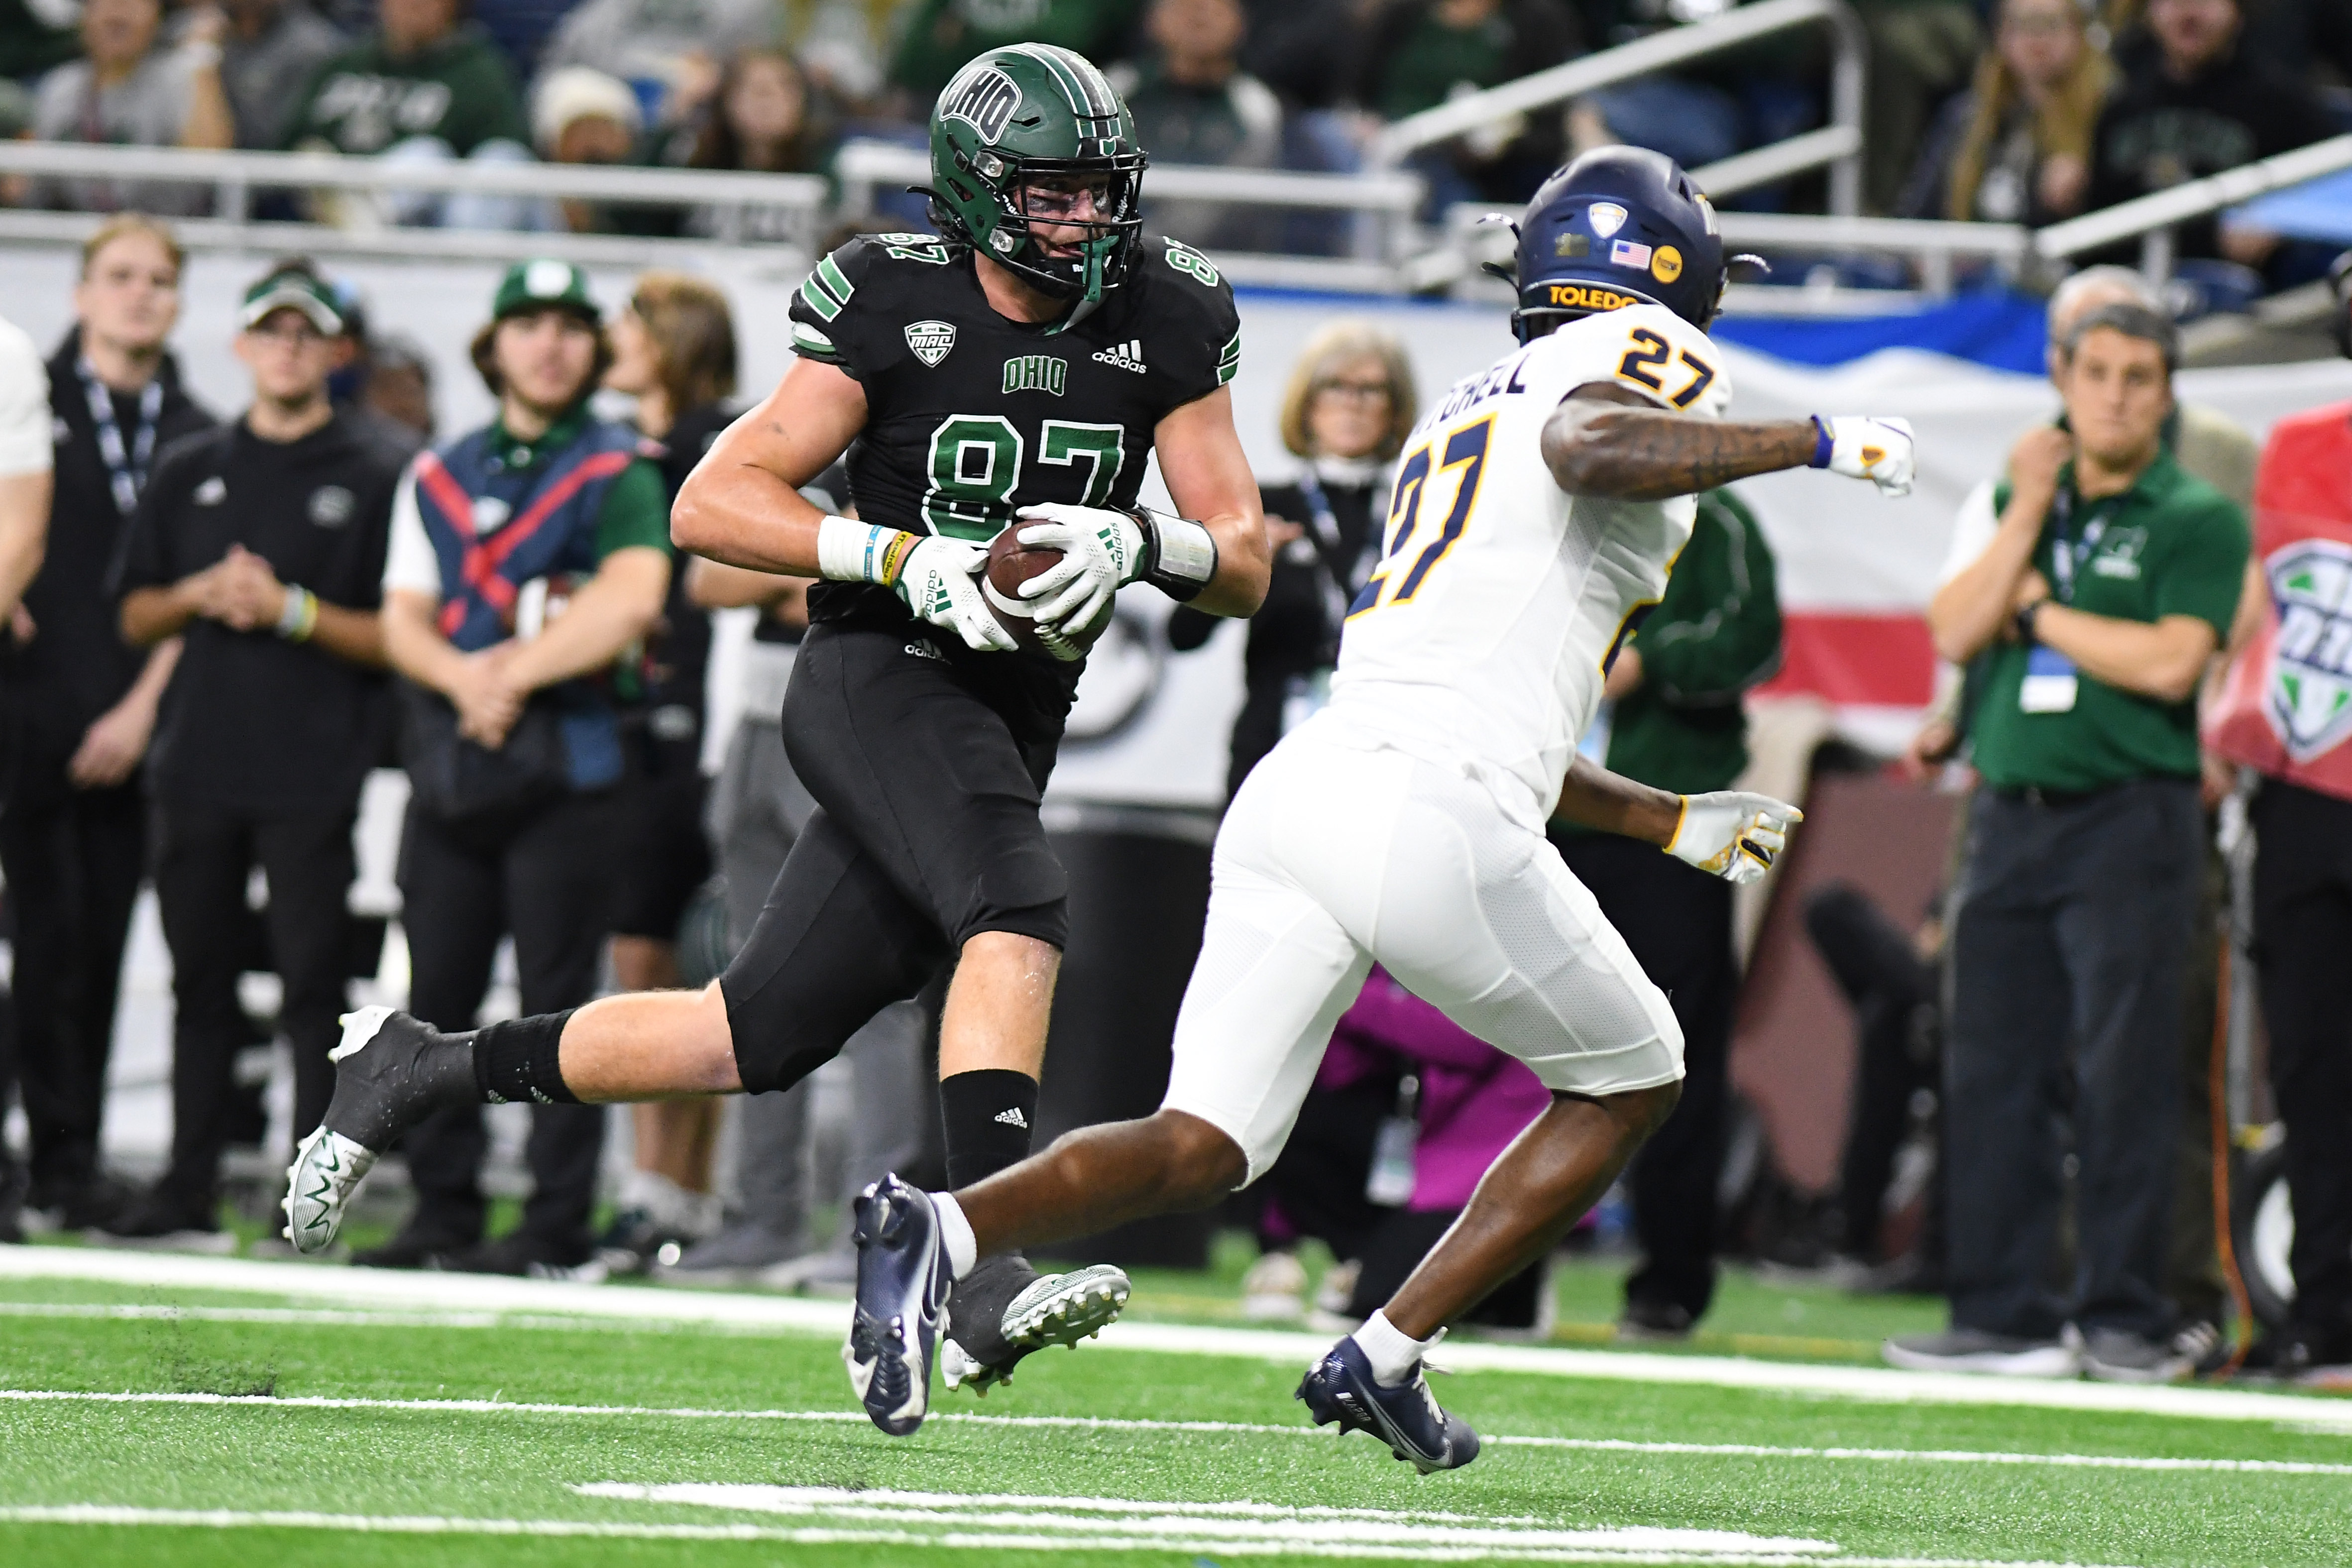 Dec 3, 2022; Detroit, Michigan, USA; Ohio University tight end Will Kacmarek (87) runs upfield after catching a pass as Toledo cornerback Quinyon Mitchell (27) closes in the second quarter at Ford Field. Mandatory Credit: Lon Horwedel-USA TODAY Sports